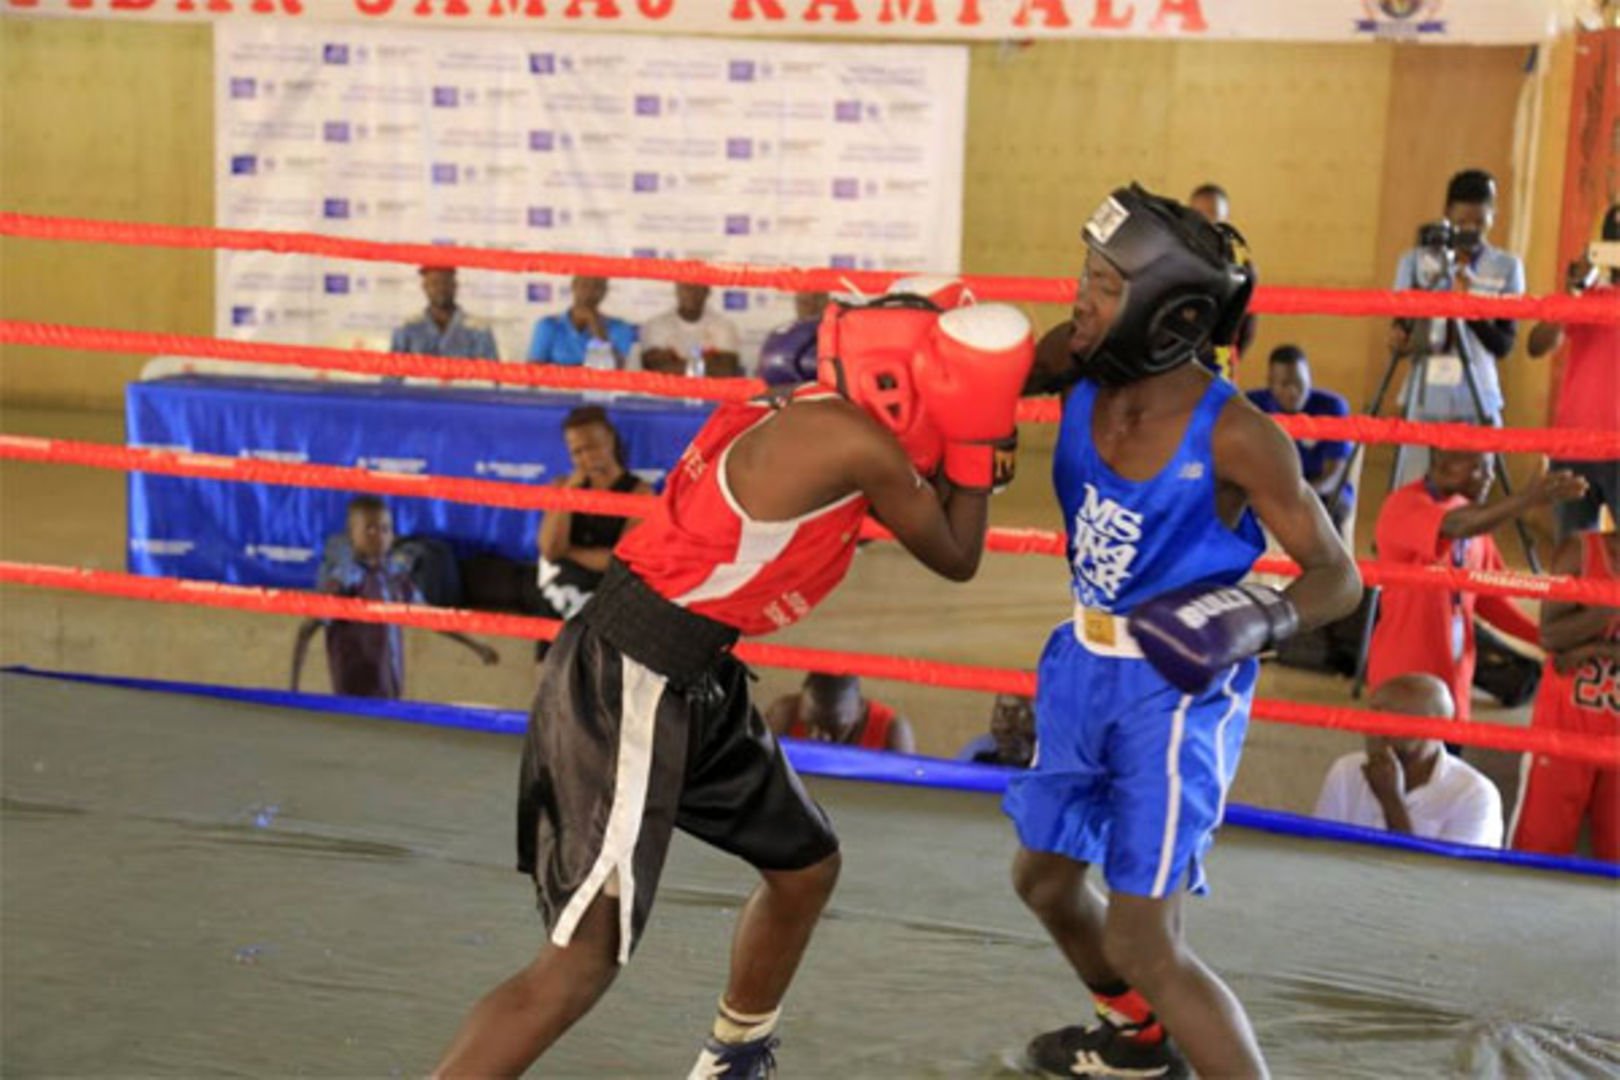 The absence of boxing in Ugandan schools starts to bite